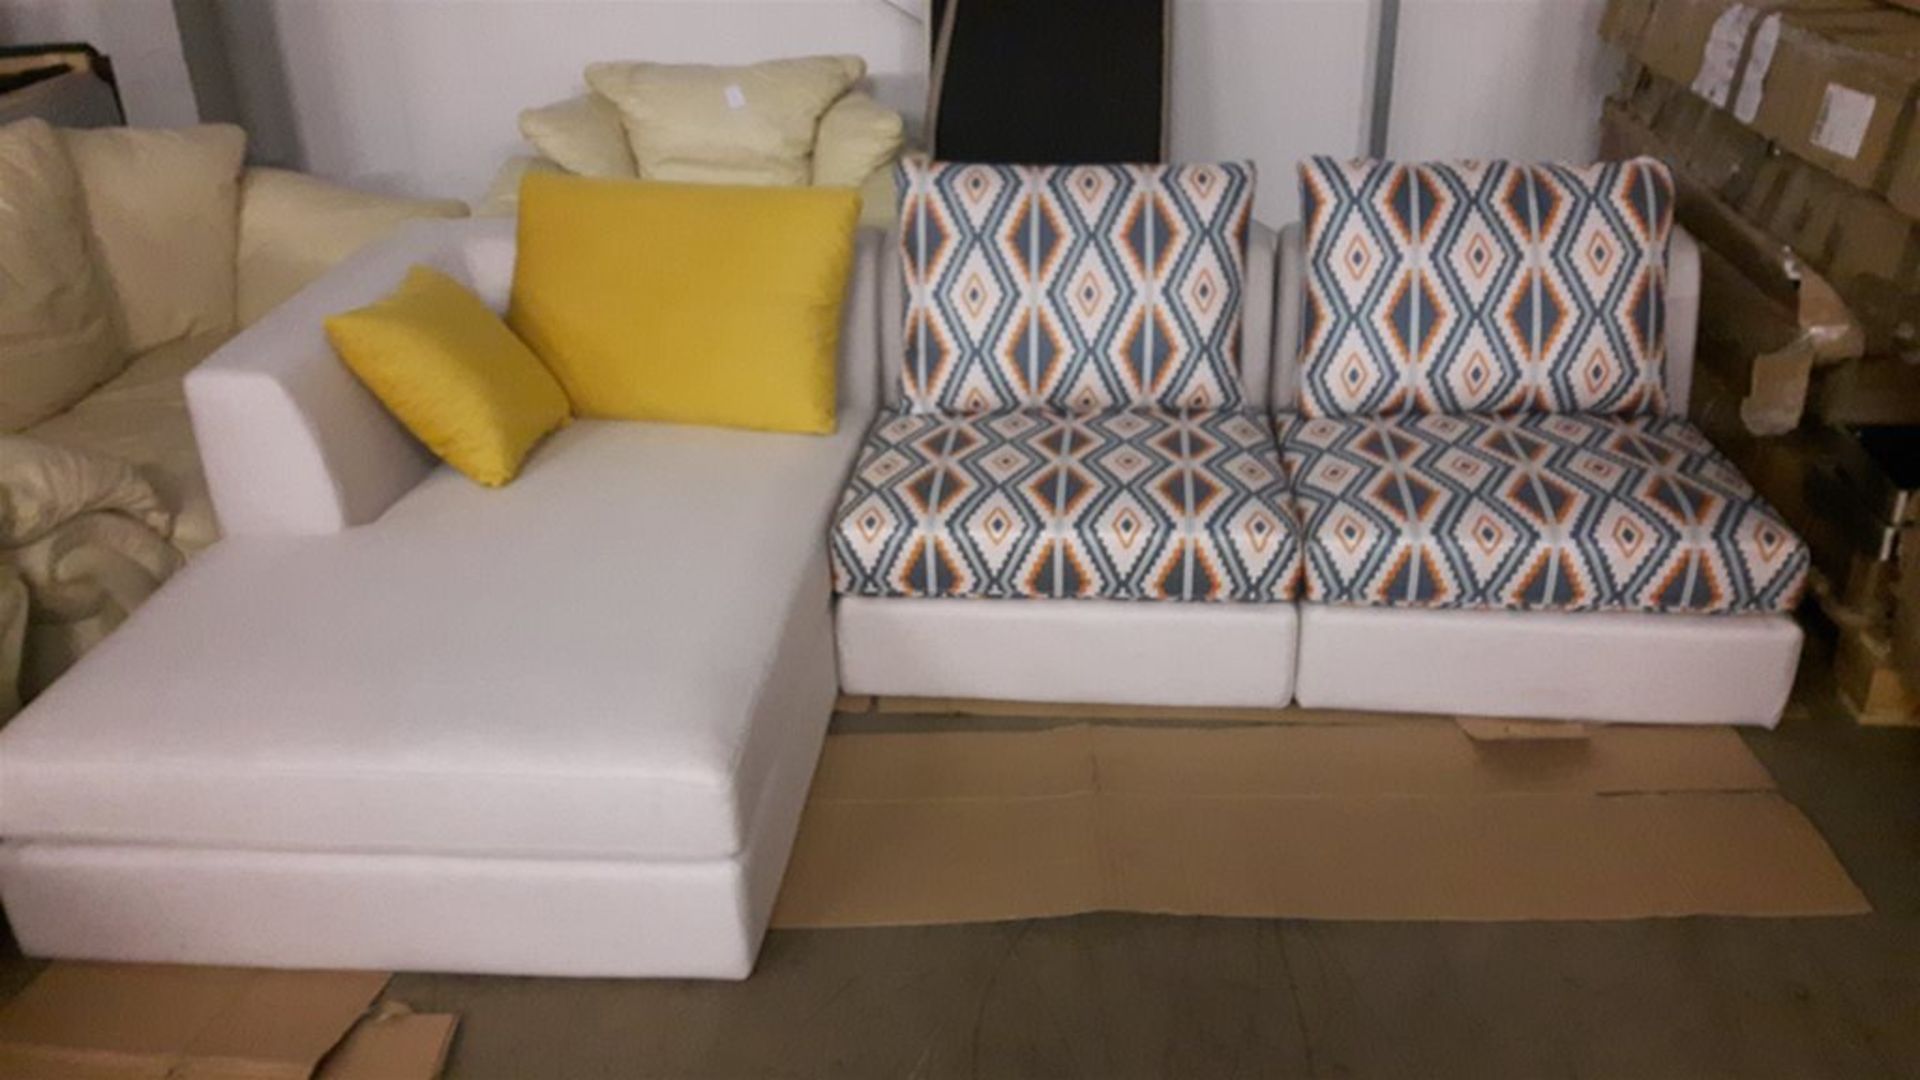 Funky sofa with chaise longue cream and yellow.